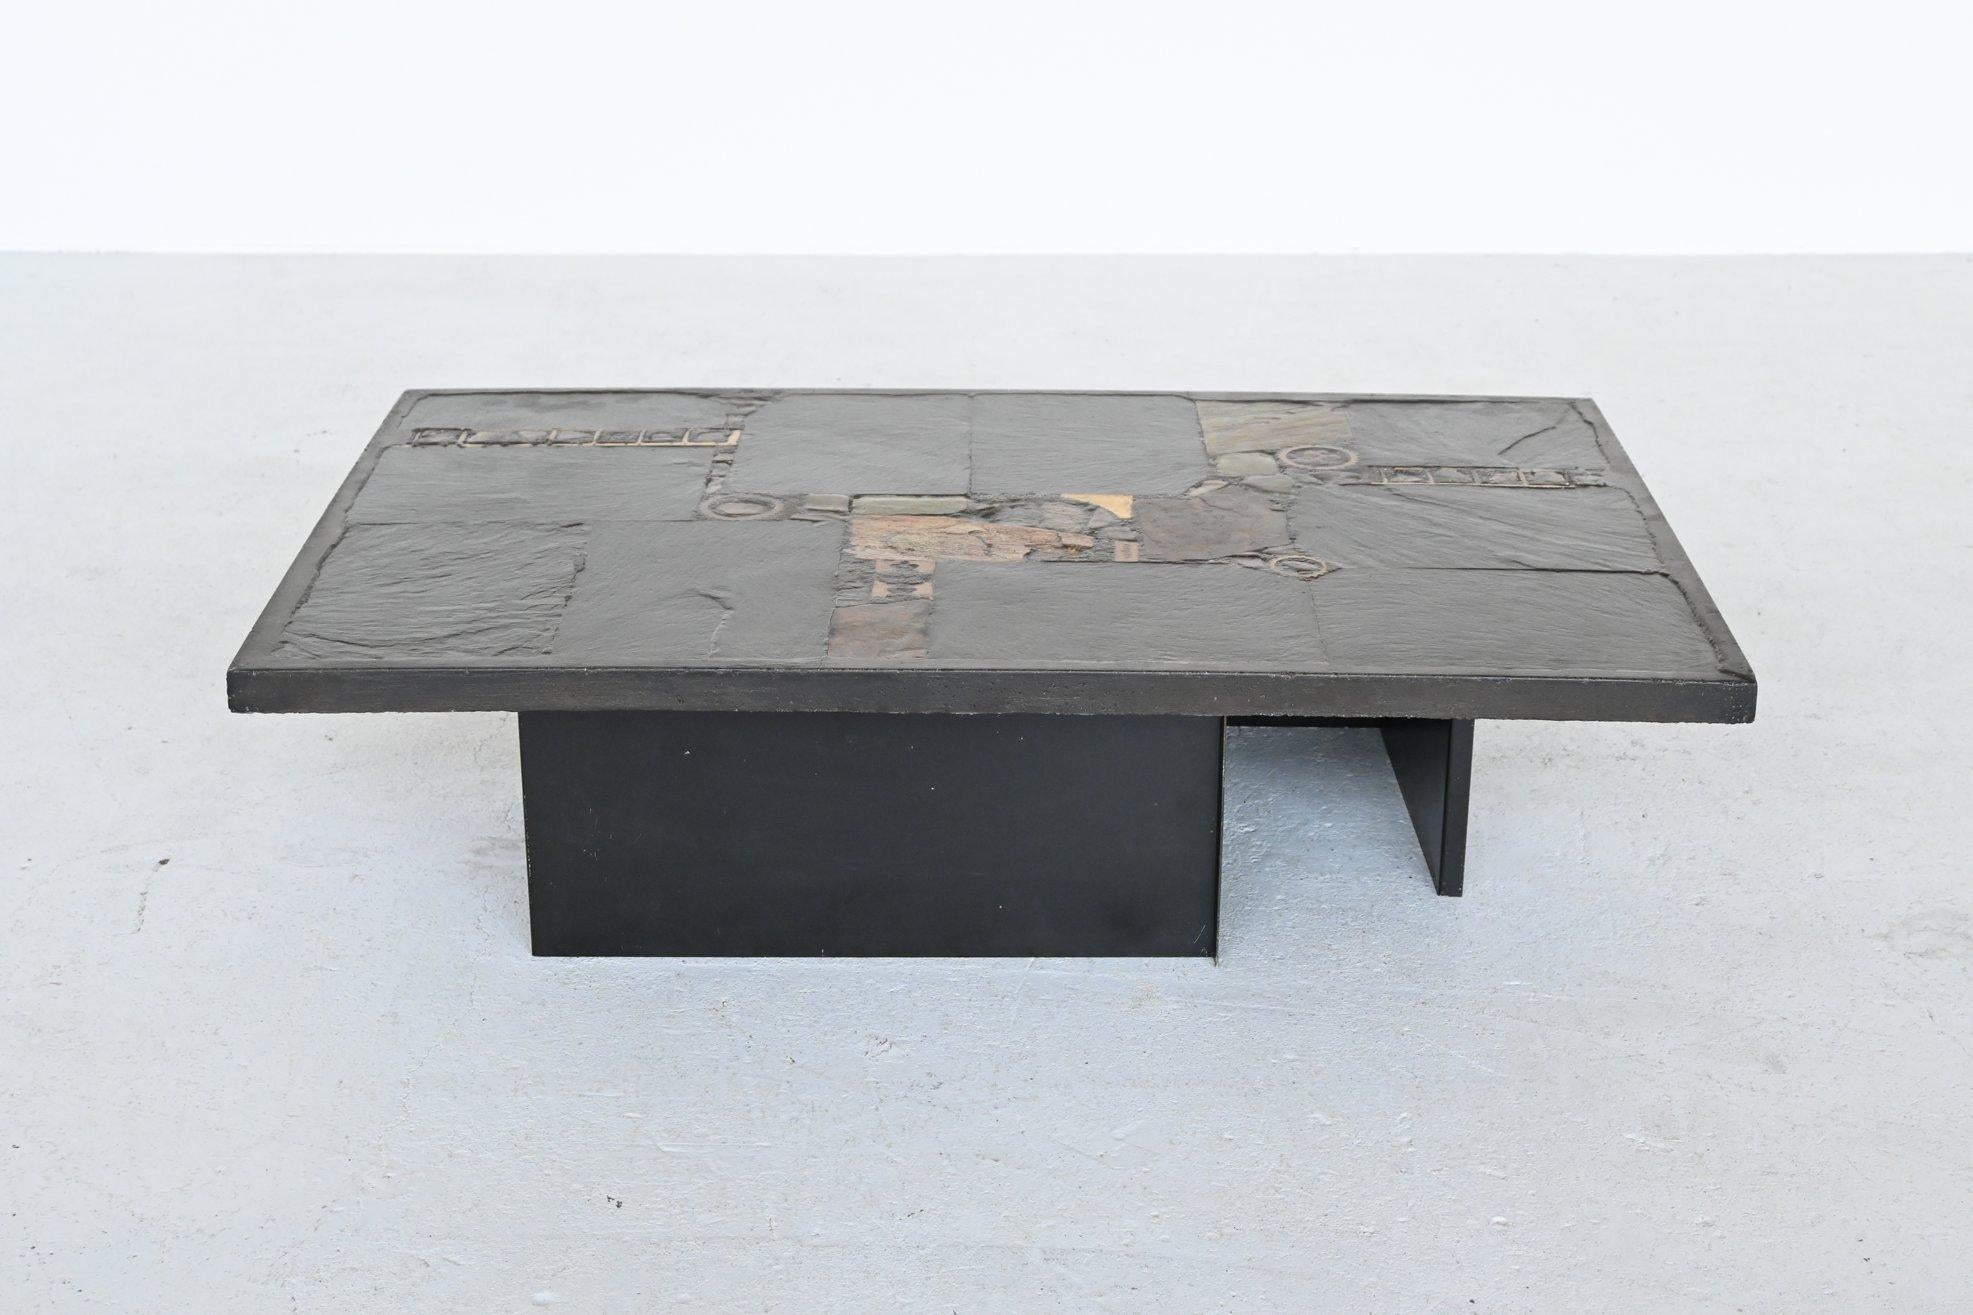 Beautiful rectangular shaped coffee table designed and made by Paul Kingma, The Netherlands 1970. The heavy concrete top rests on 2 metal L-shaped bases that are black lacquered. Beautiful composition of slate, stones, copper and brass makes this